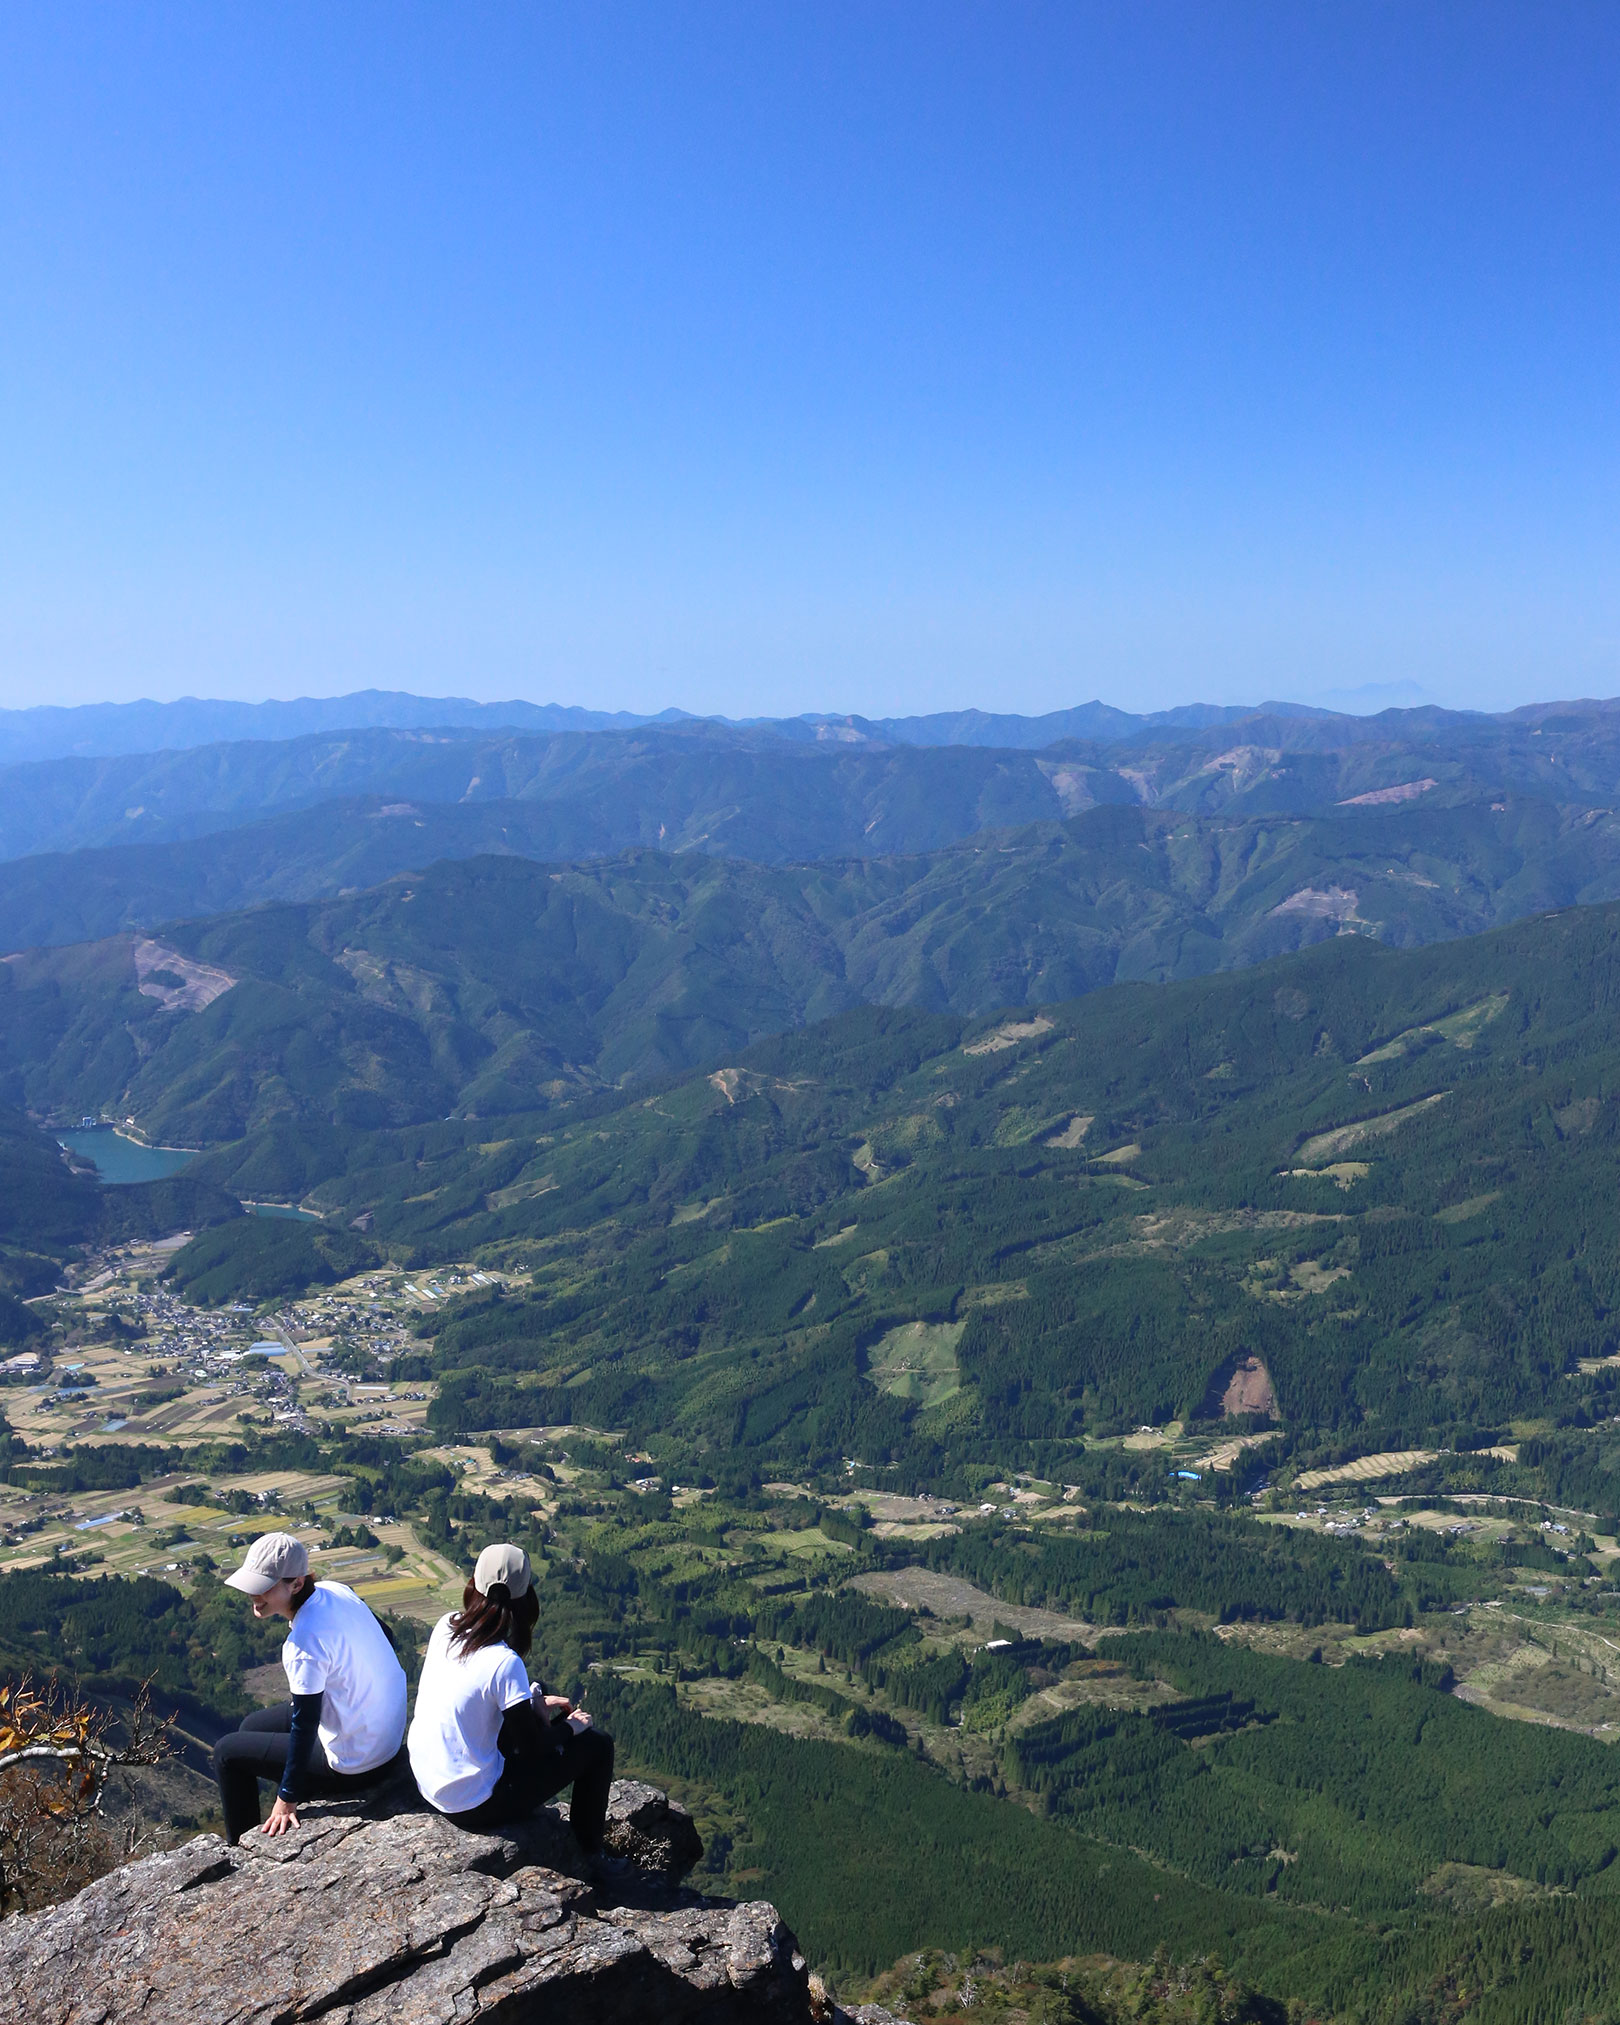 The summit of Mt. Ichifusa. Kumamoto Prefecture can be seen in the background.